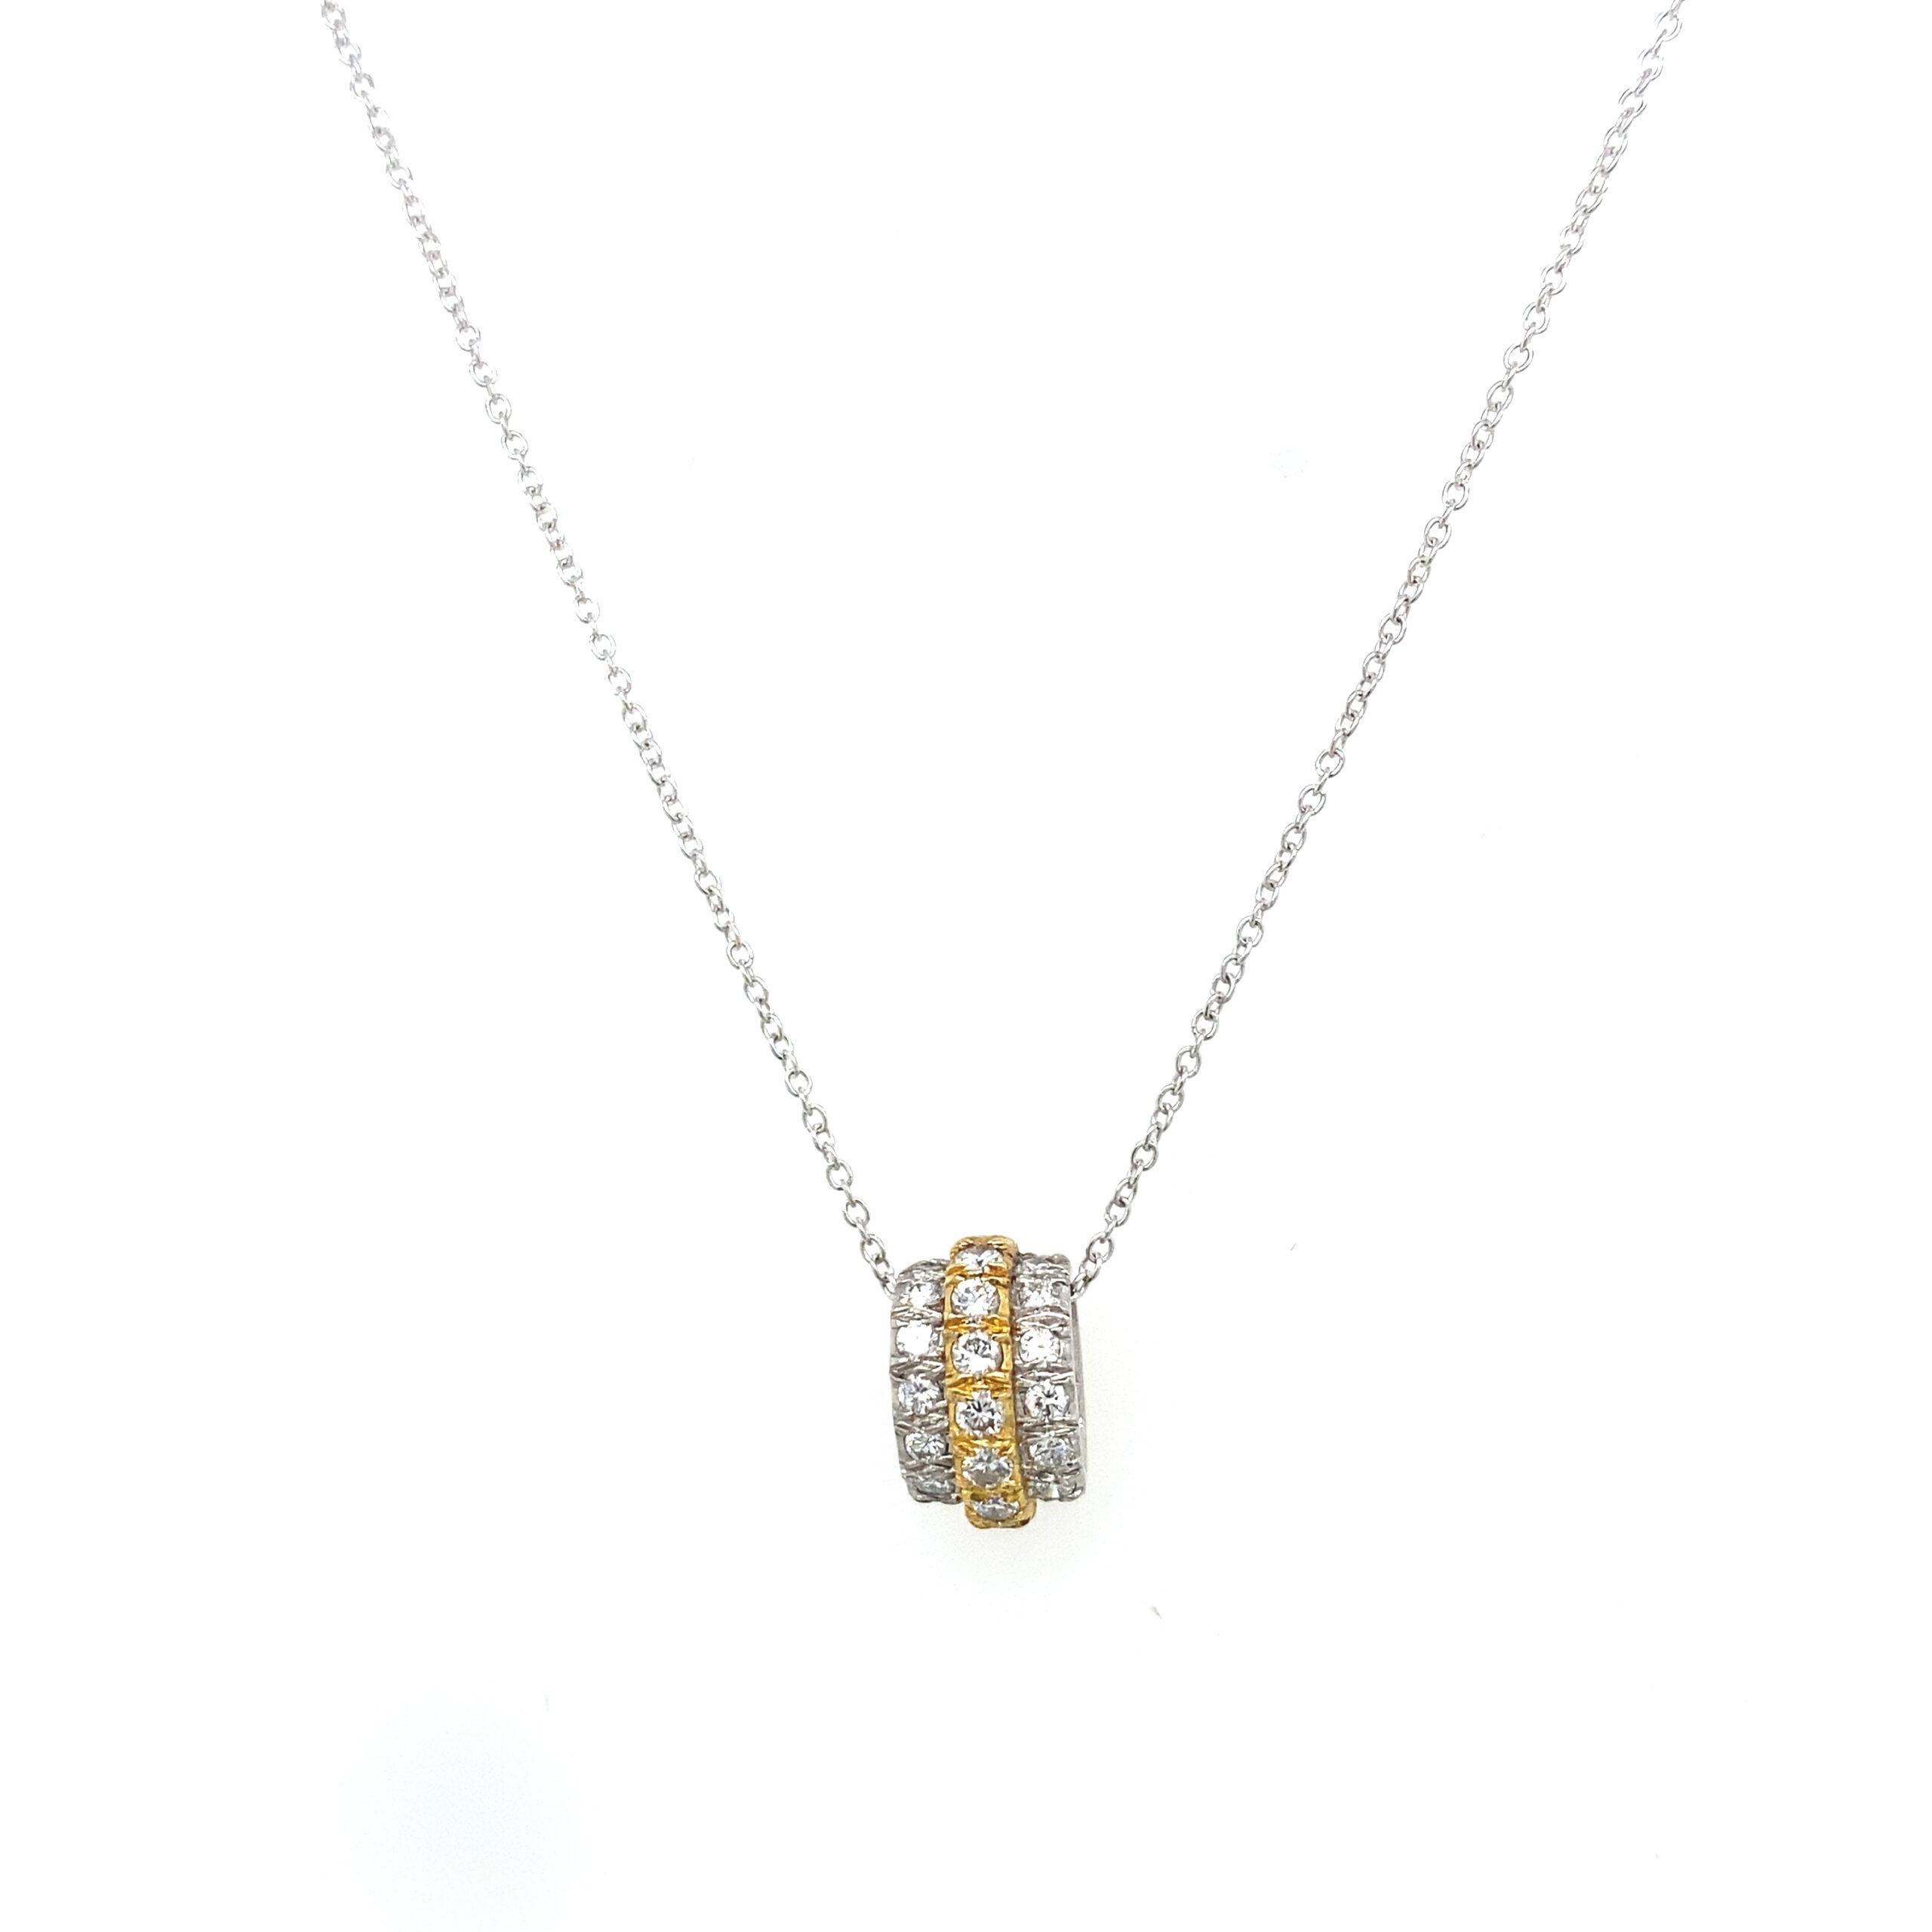 18ct Yellow & White Gold 3-Row Diamond Pendant With 16/18″ 18ct Gold Chain

Additional Information:
Total Diamond Weight: 0.30ct
Diamond Colour: F/G
Diamond Clarity: VS
Total Weight: 4.1g
Pendant Size: L 11.50mm X W 7.25mm
SMS4872